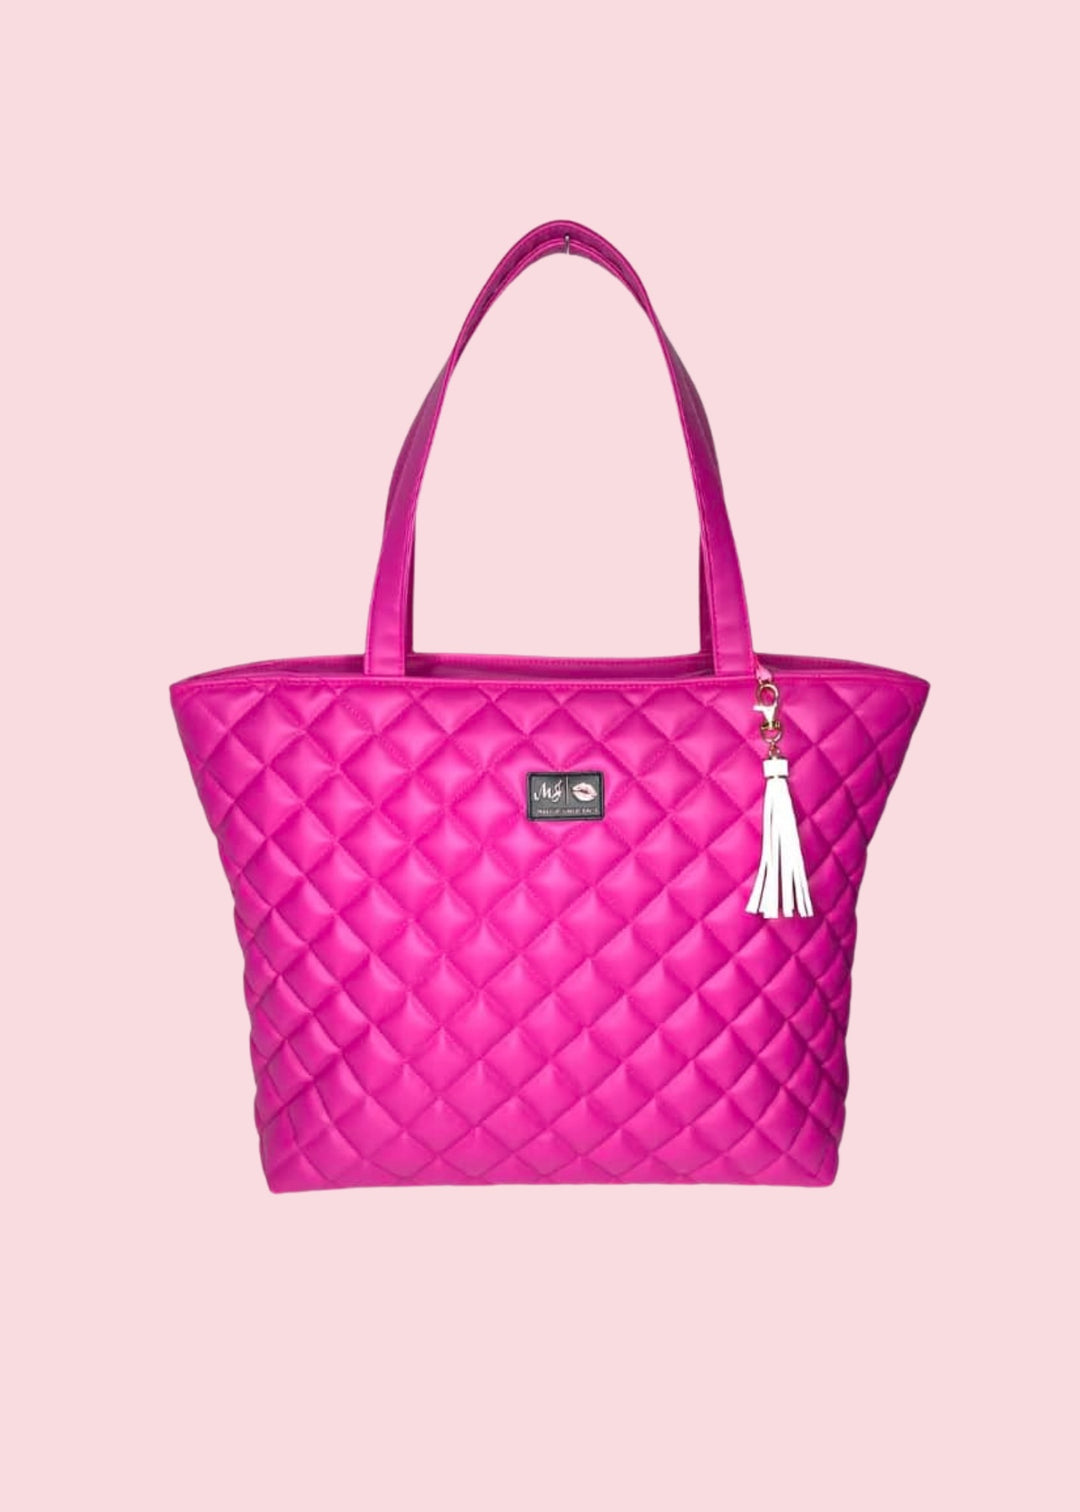 Makeup Junkie Bags - Luxe Hot Fuchsia Quilted Tote [Pre-Order]